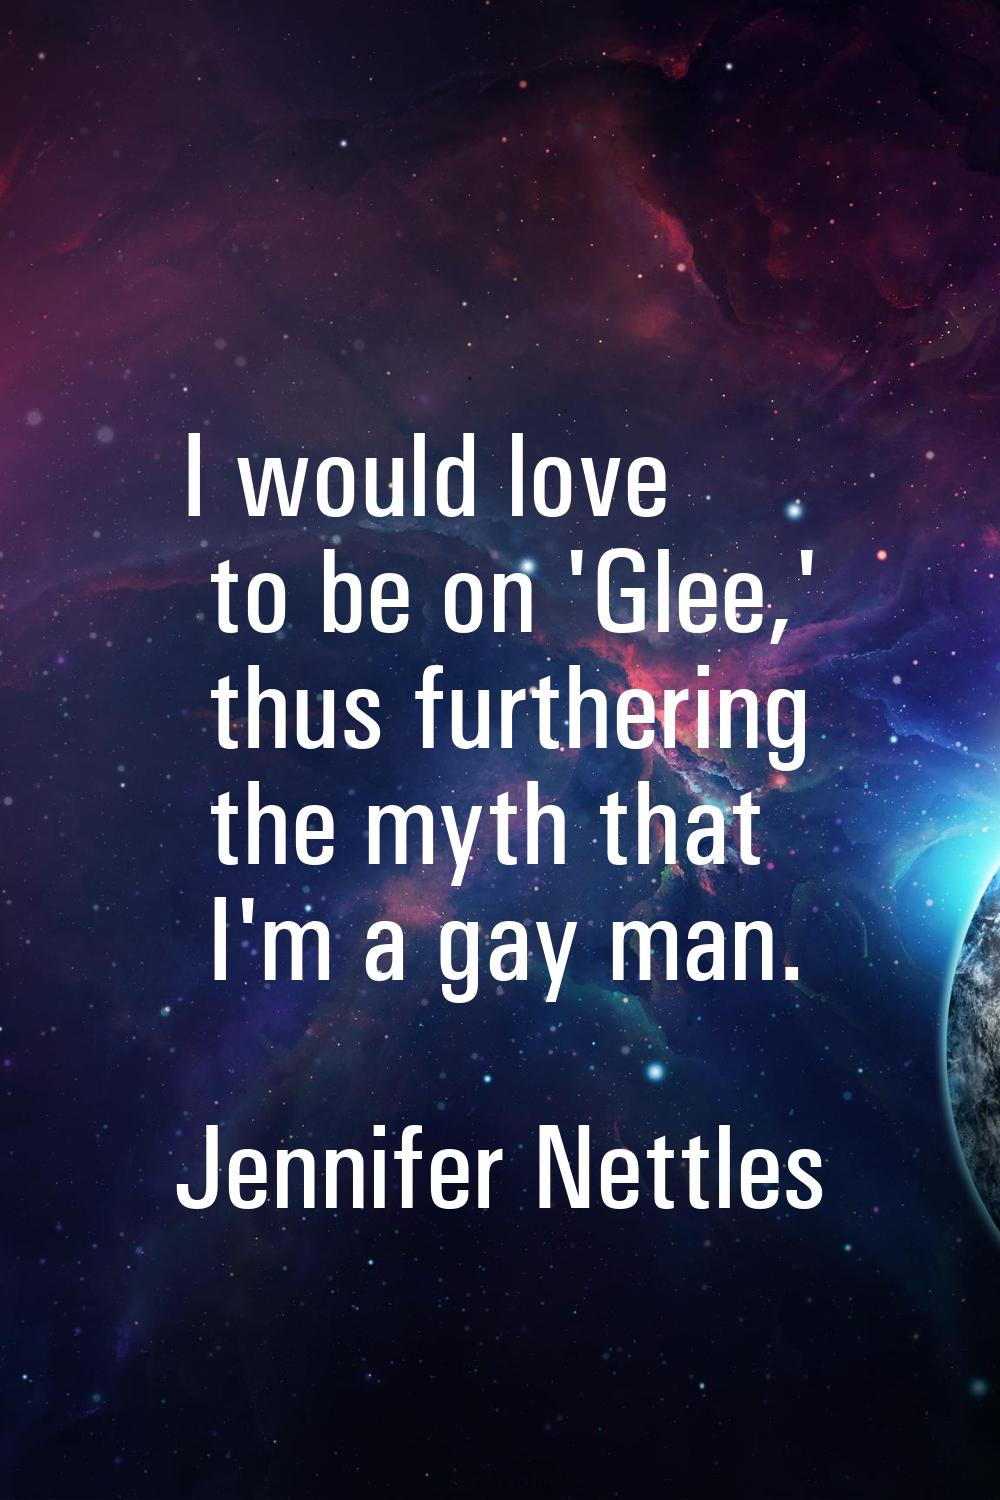 I would love to be on 'Glee,' thus furthering the myth that I'm a gay man.